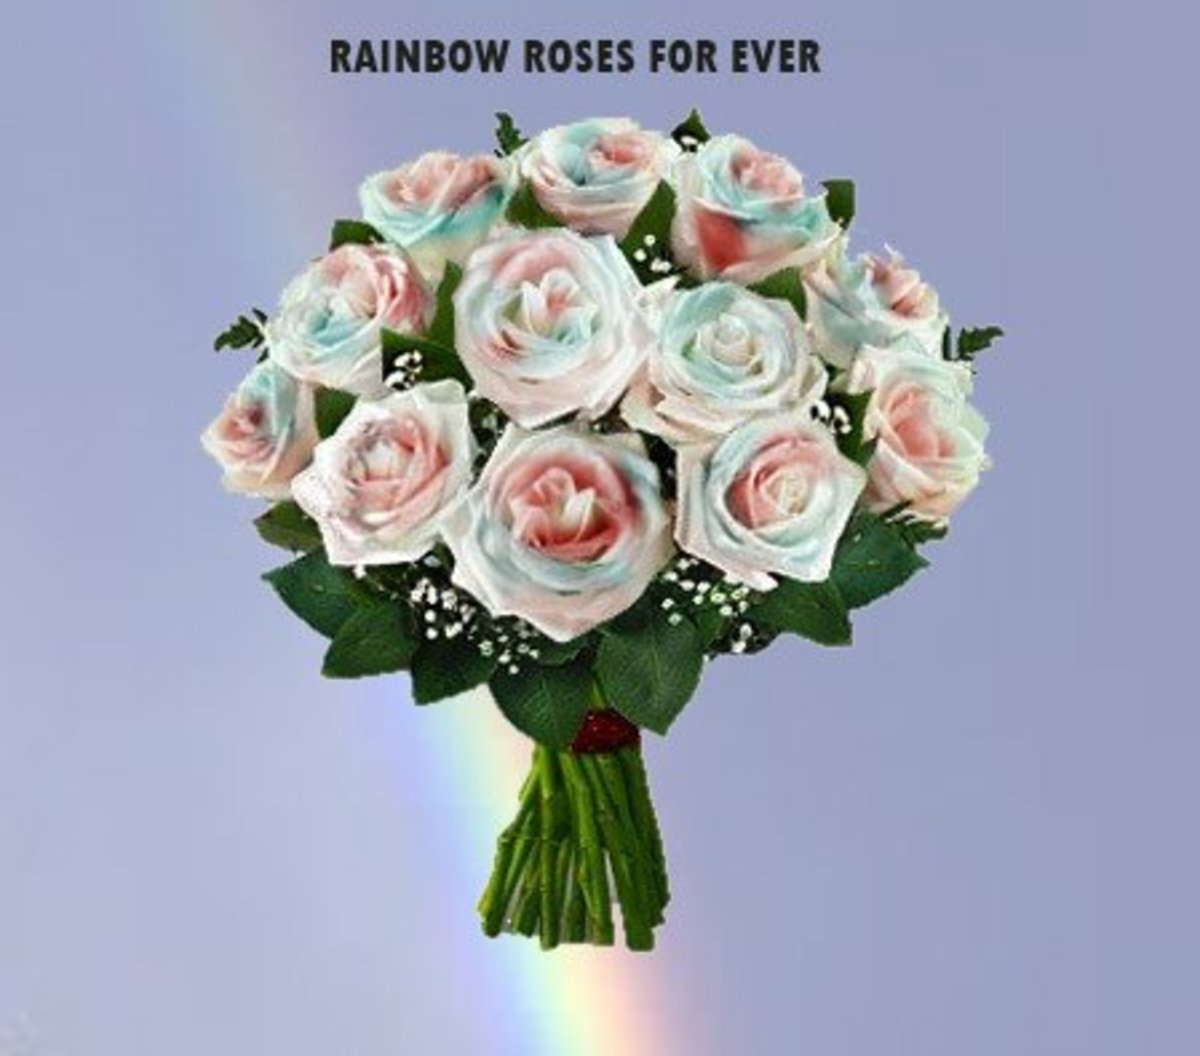 Rainbow Roses can bring smile...